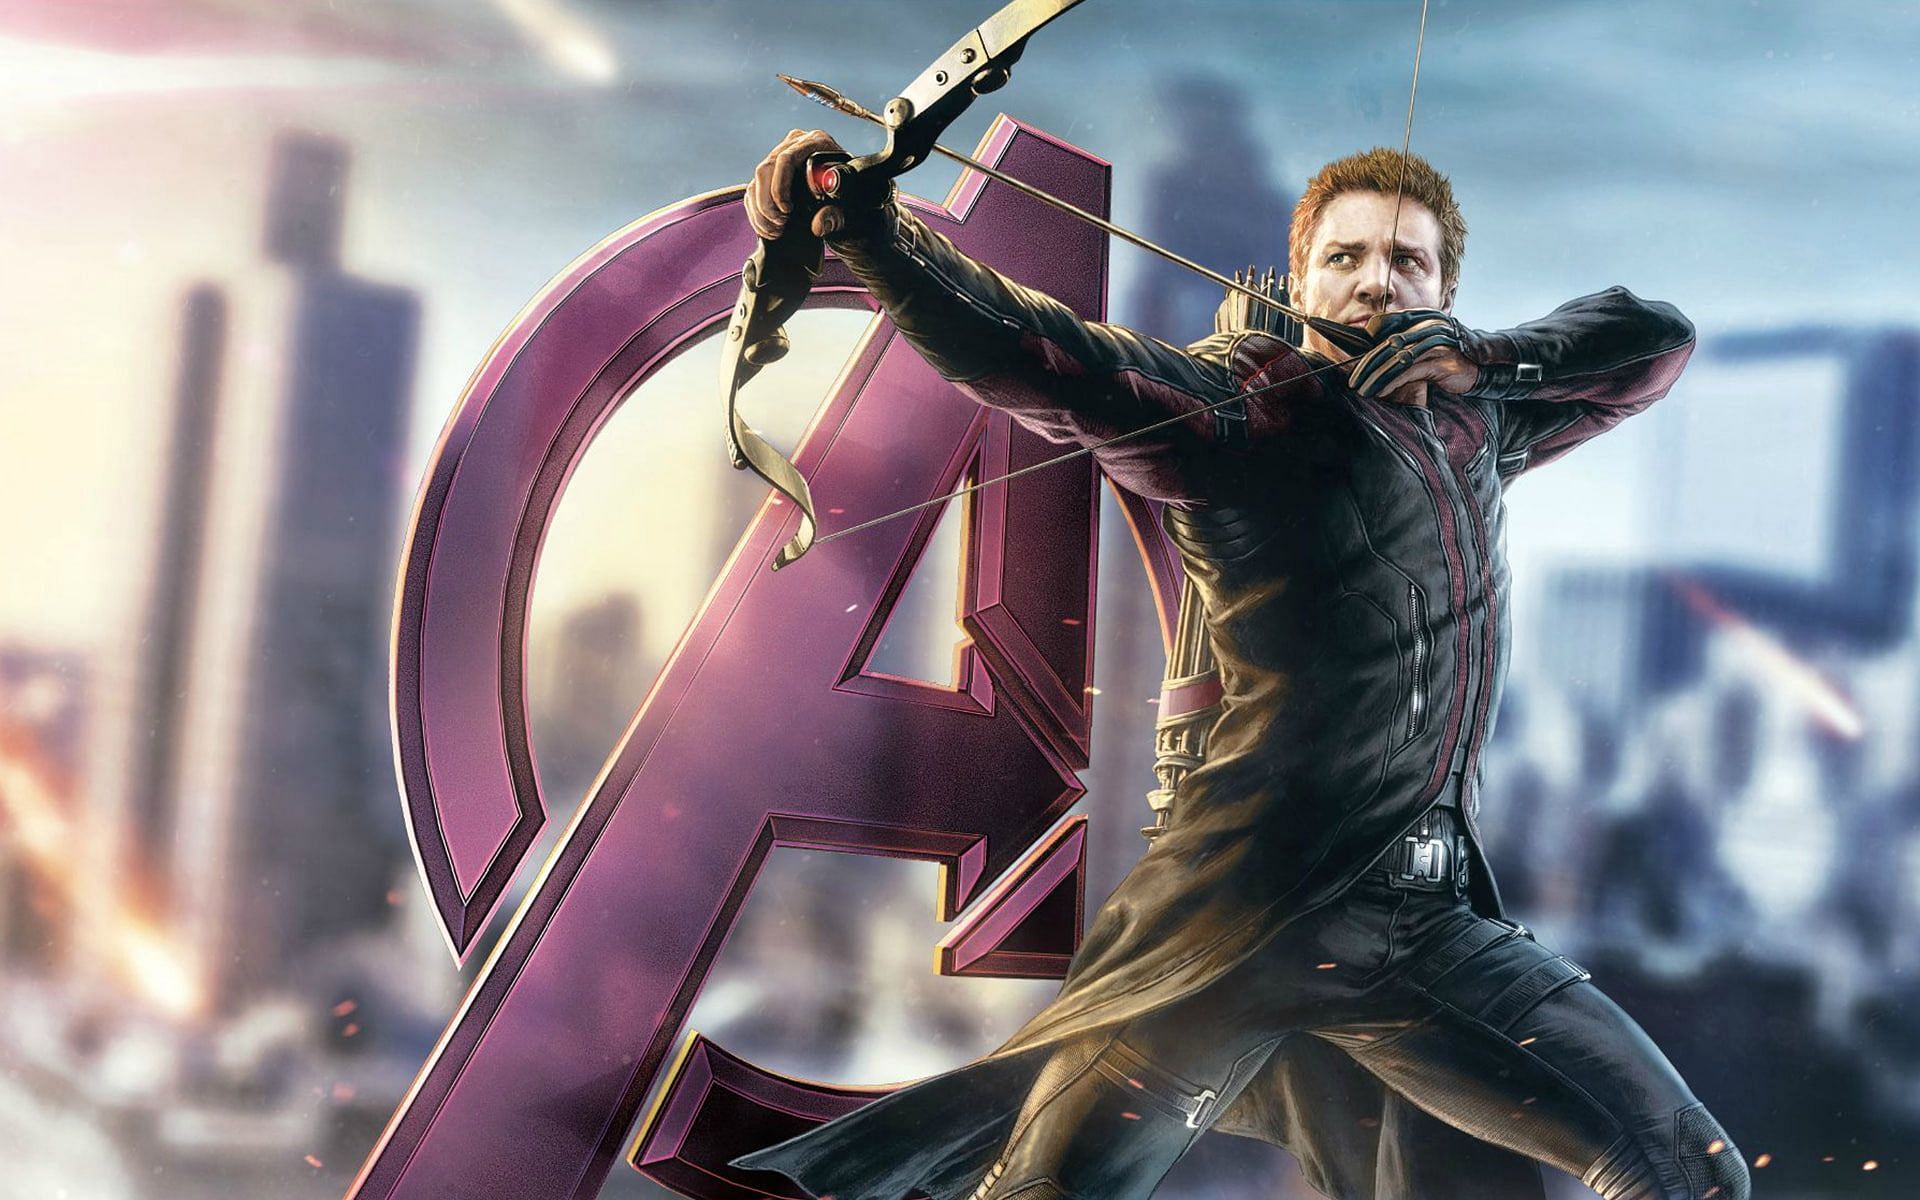 Hawkeye, also known as Clint Barton, is a popular character in the Marvel Comics universe. (Image via Marvel)